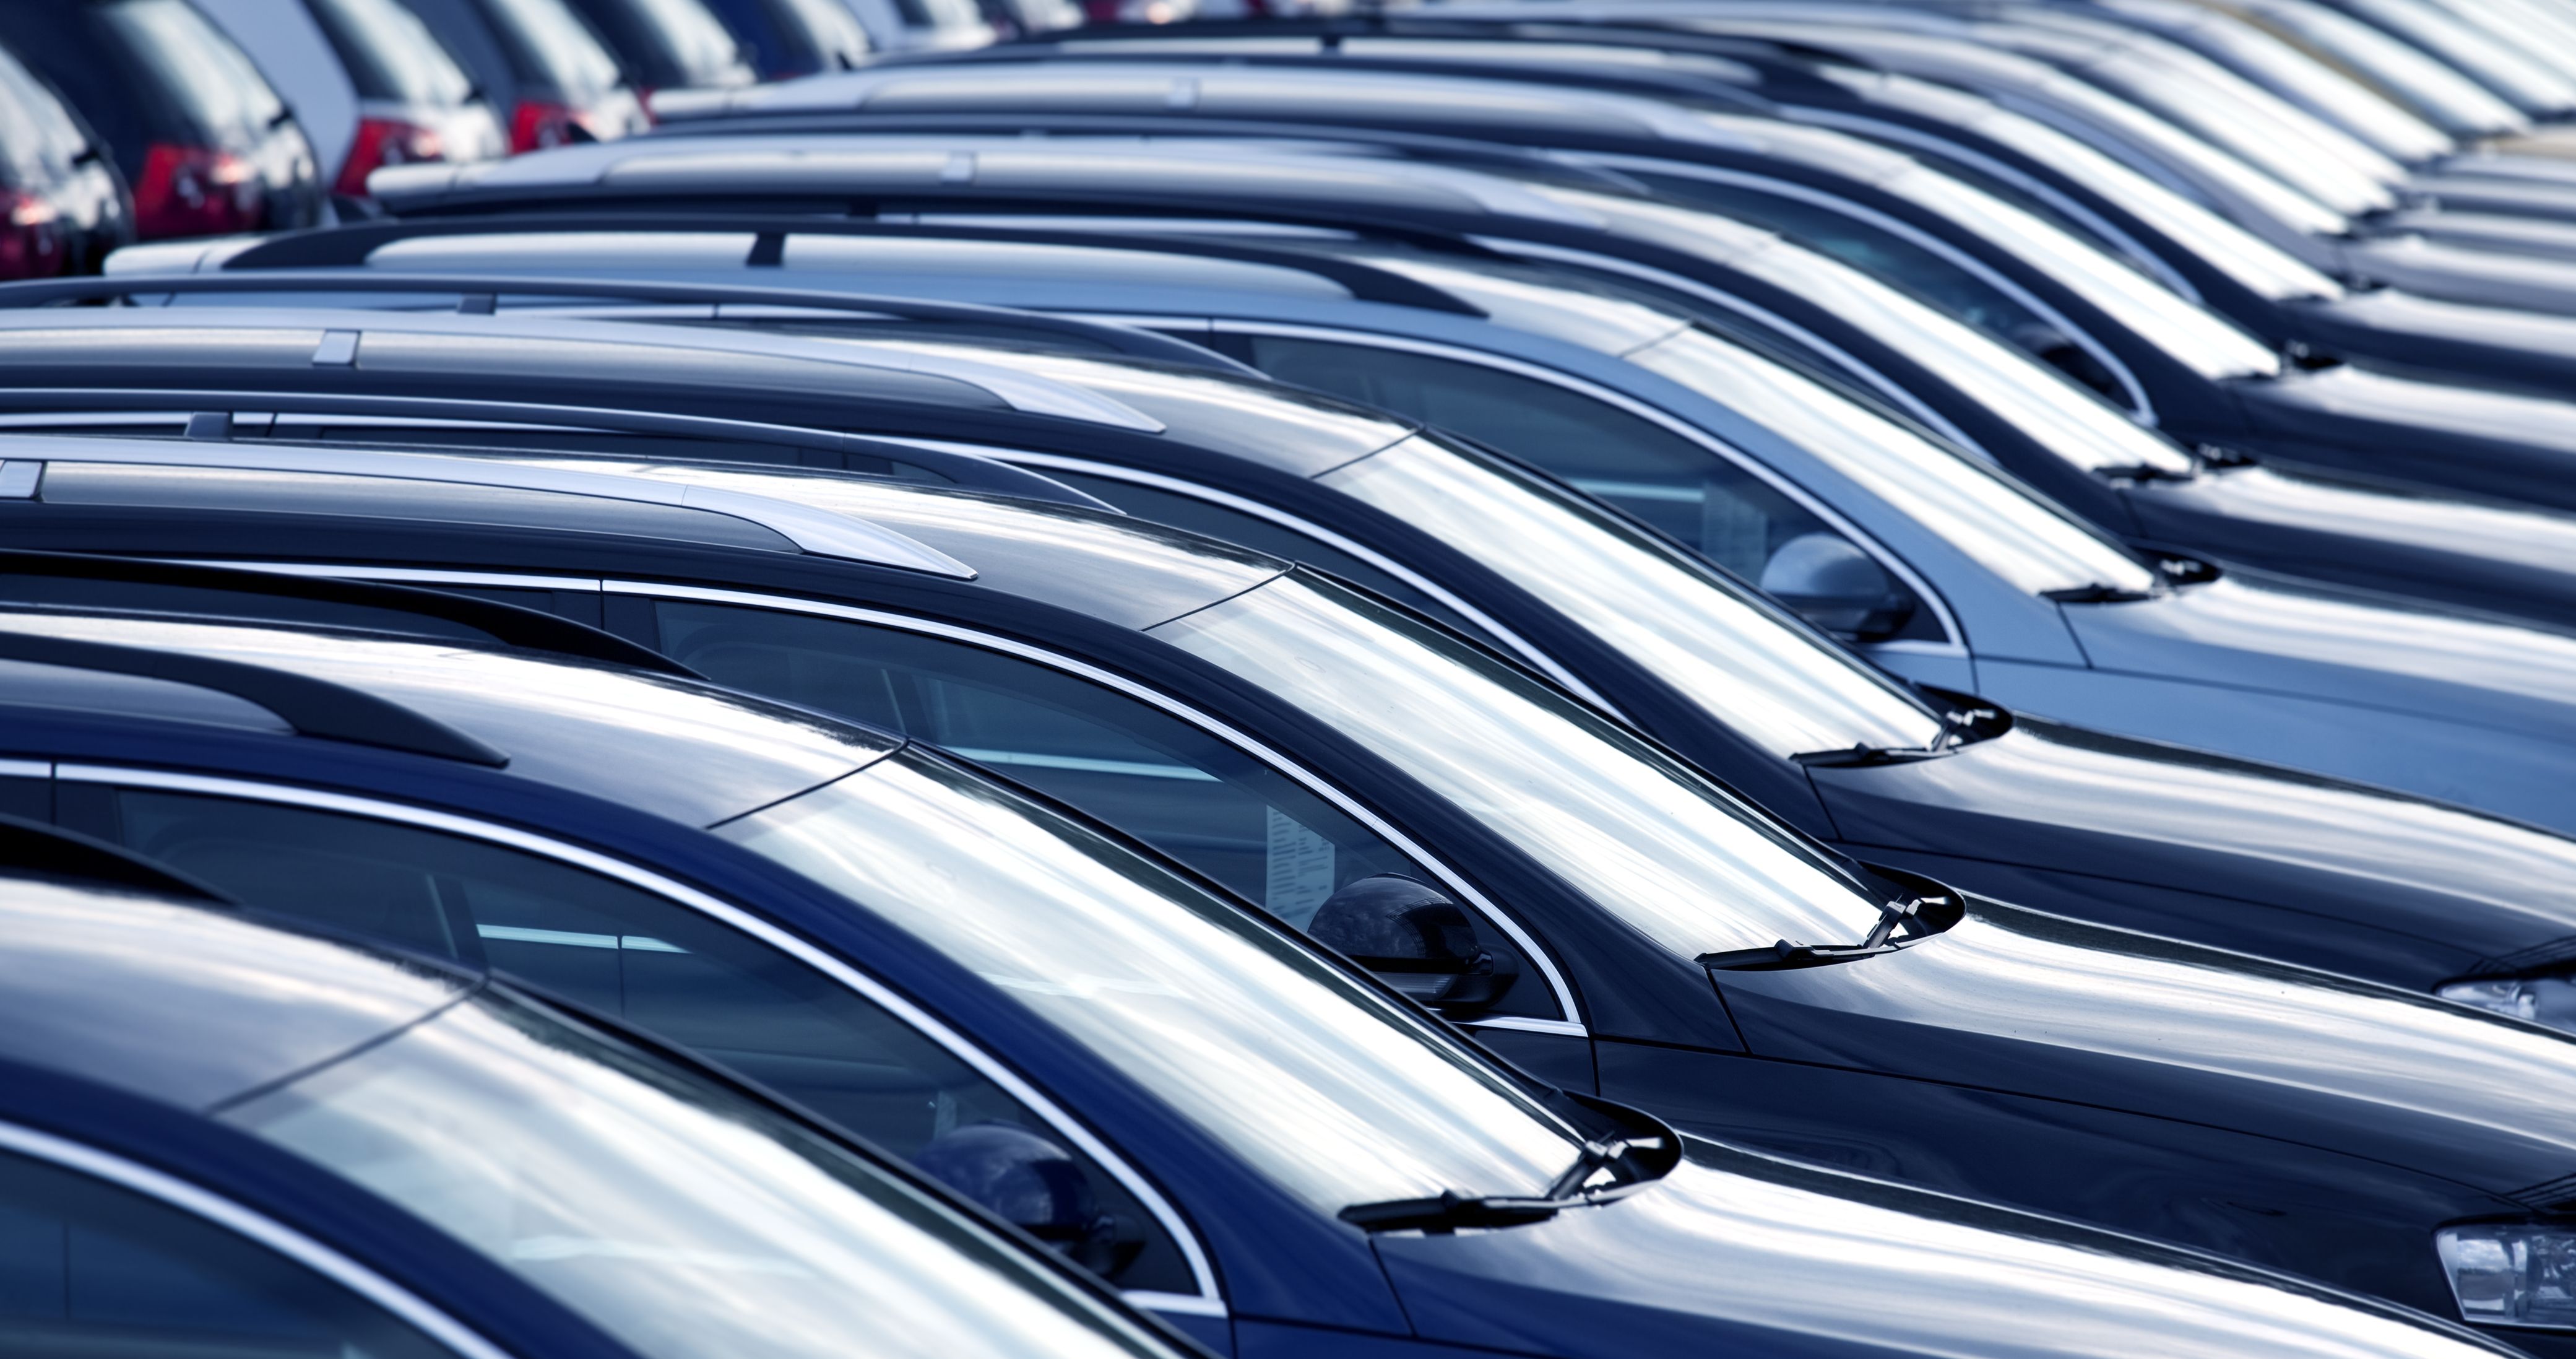 new cars in a row at dealership royalty free image 1584904680